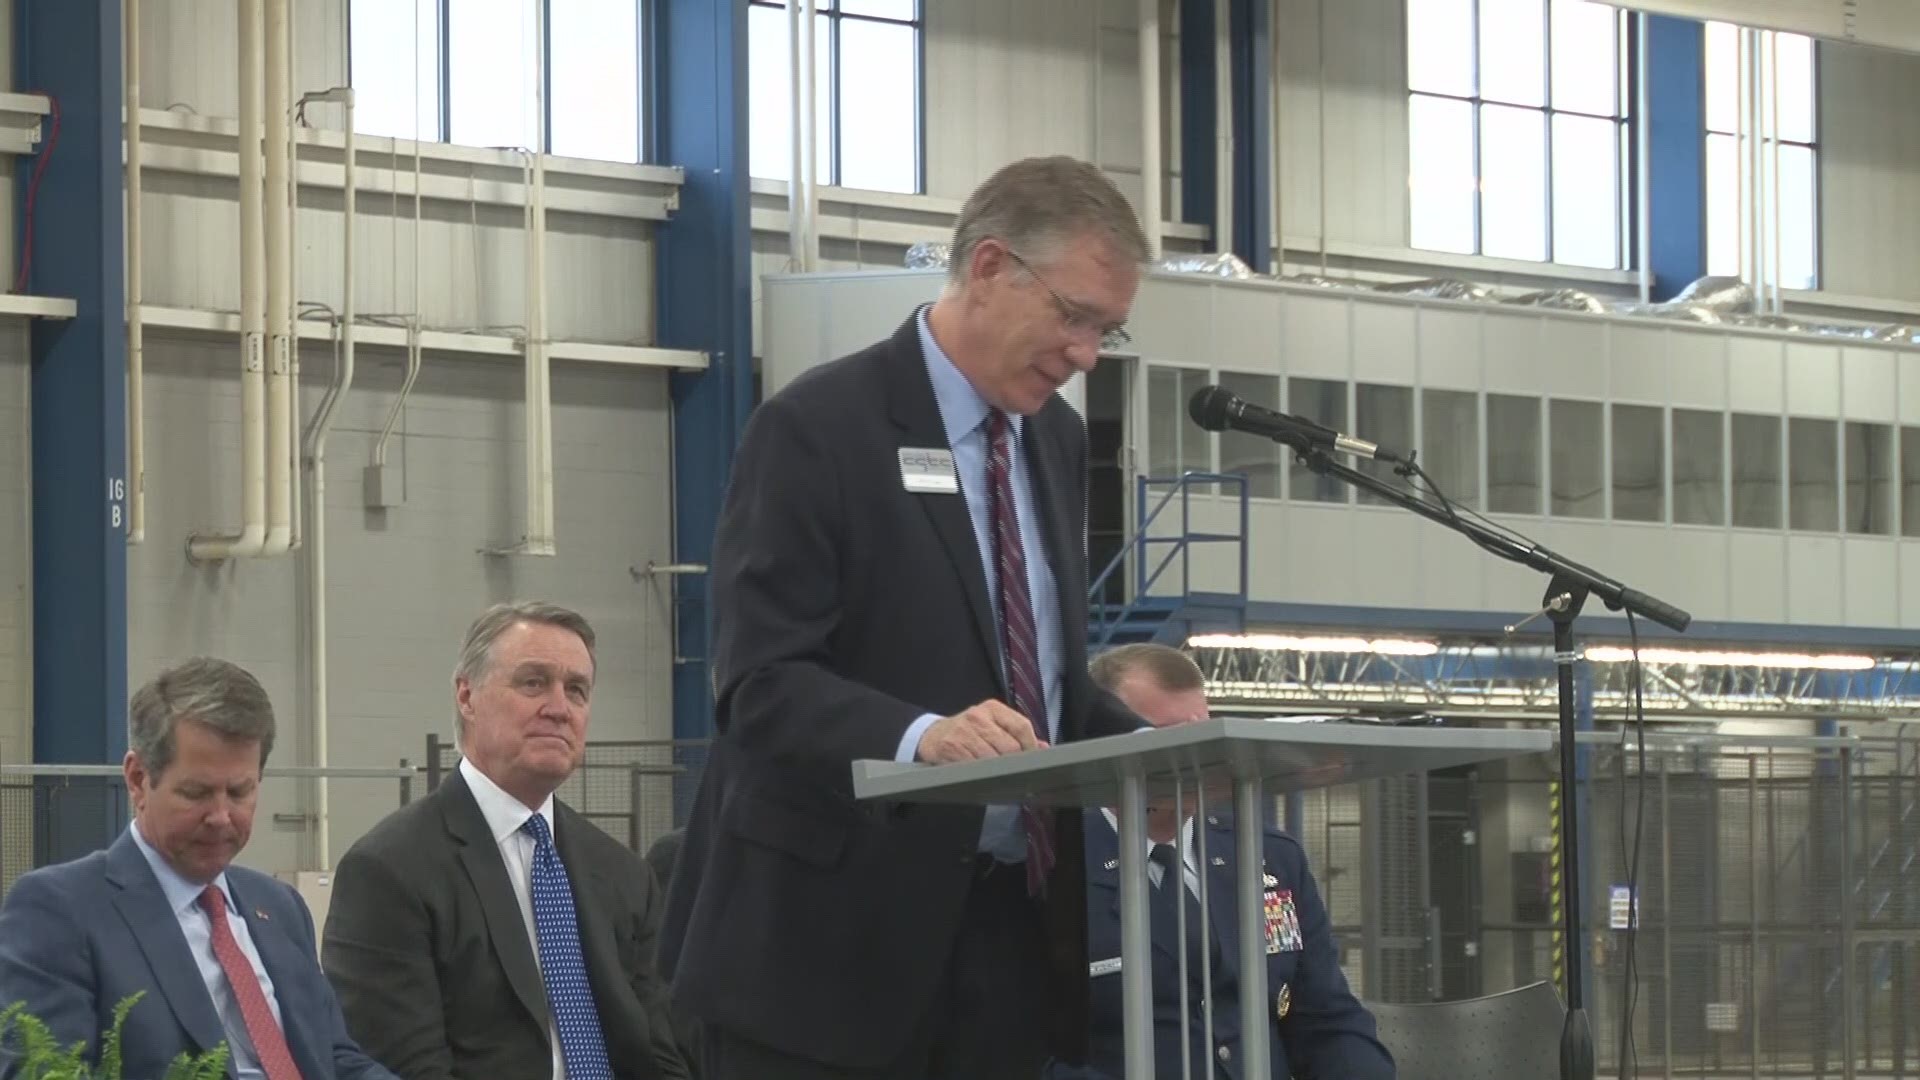 The Macon-Bibb Industrial Authority along with Central Georgia Technical College and Robins Air Force Base announced a partnership at Friday morning at the former Boeing plant.The partnership and new aviation program will train workers for Georgia's thriving aerospace industry including jobs at Robins Air Force base.